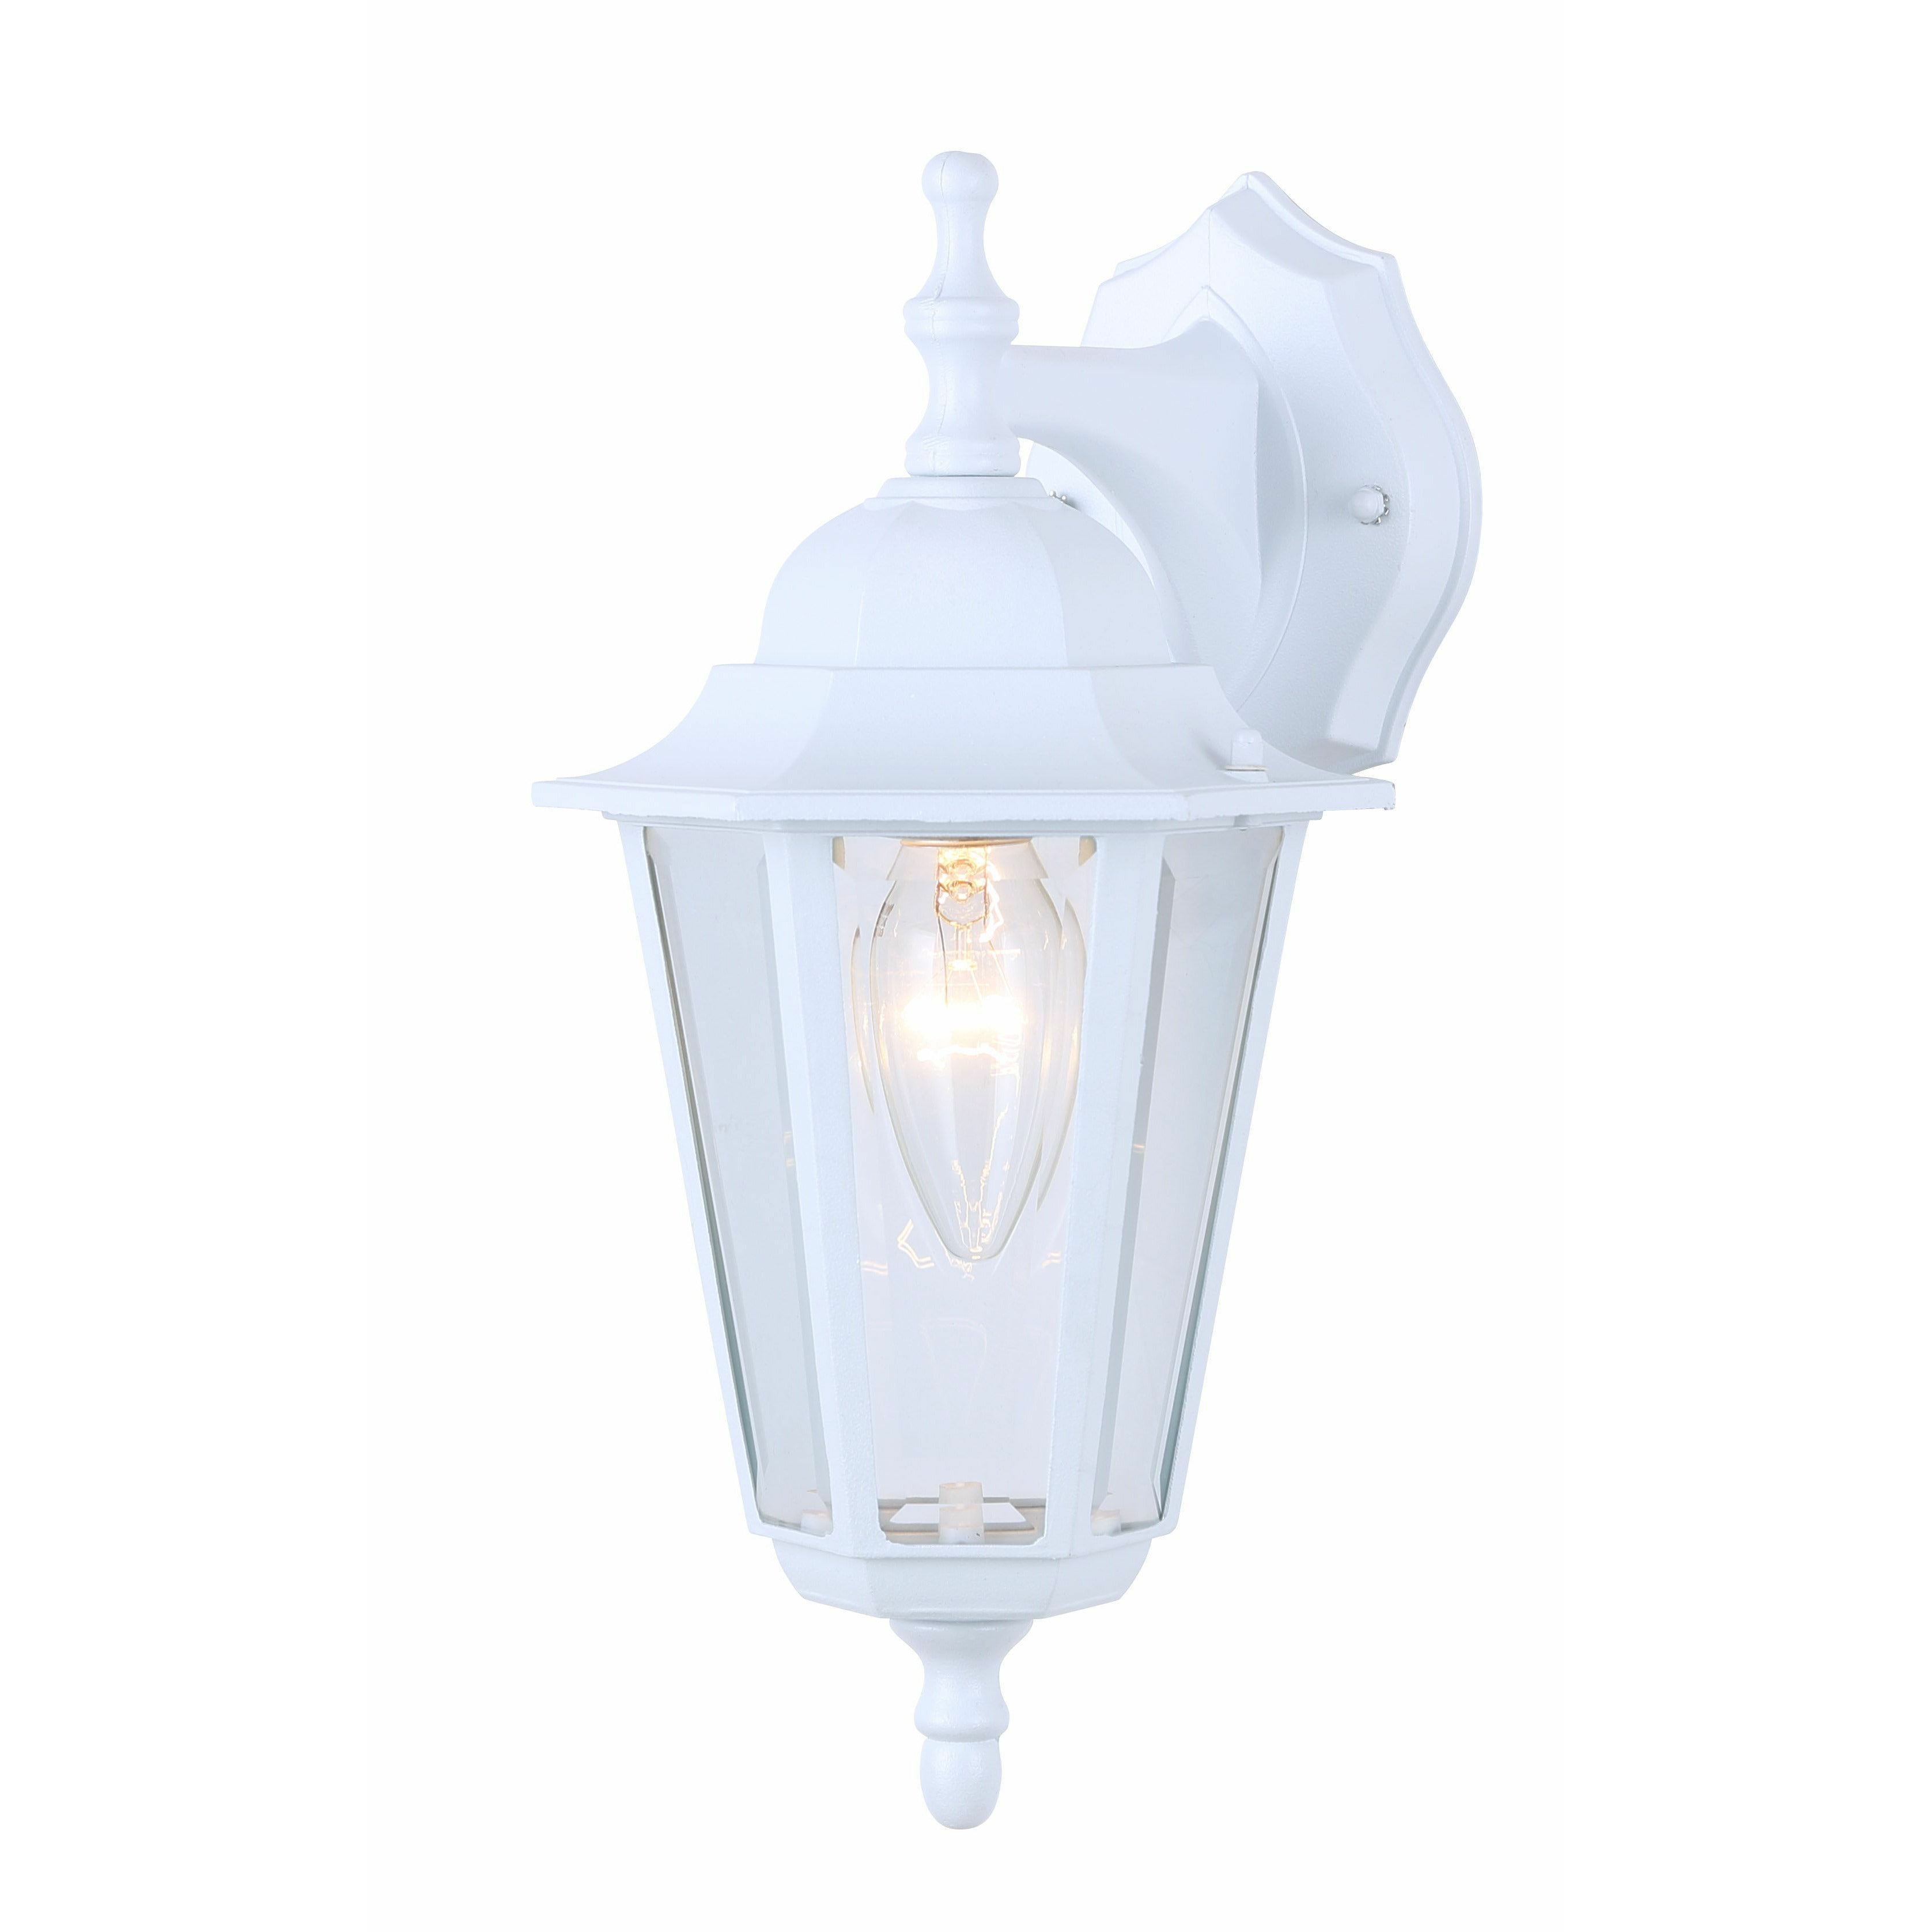 Iol2 Outdoor Wall Light White